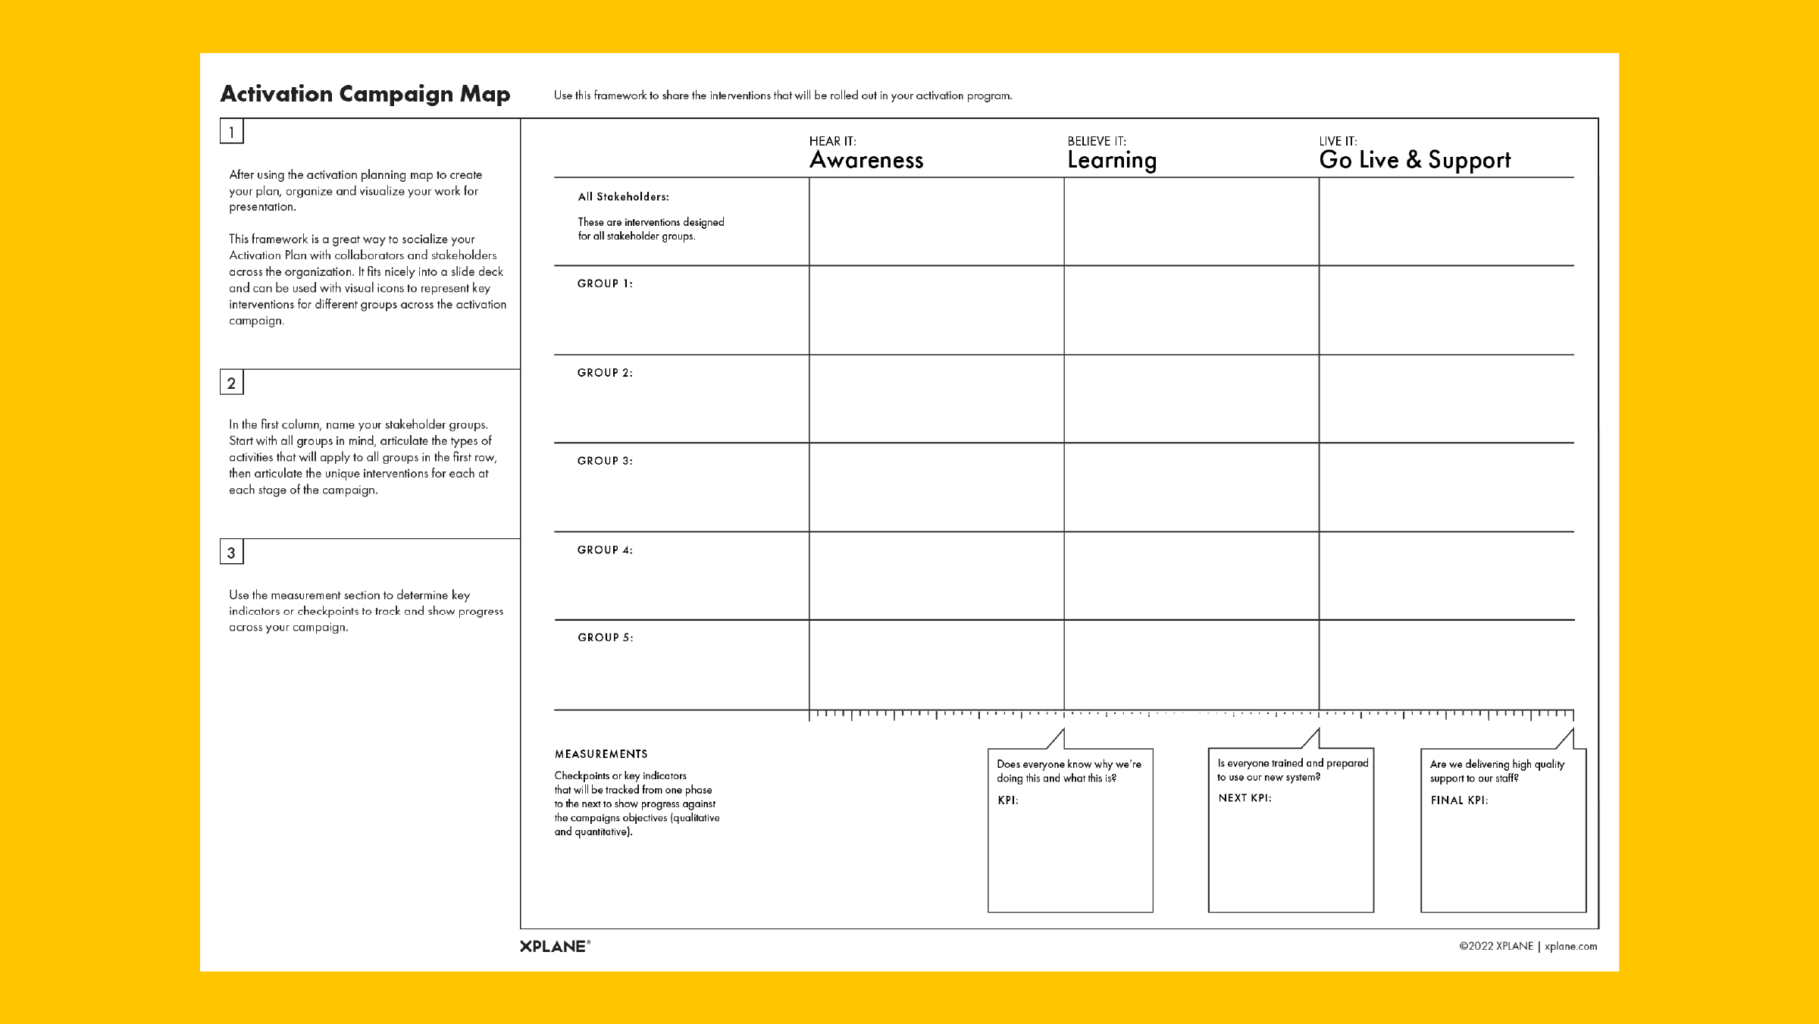 Activation Campaign Map worksheet against a yellow background.